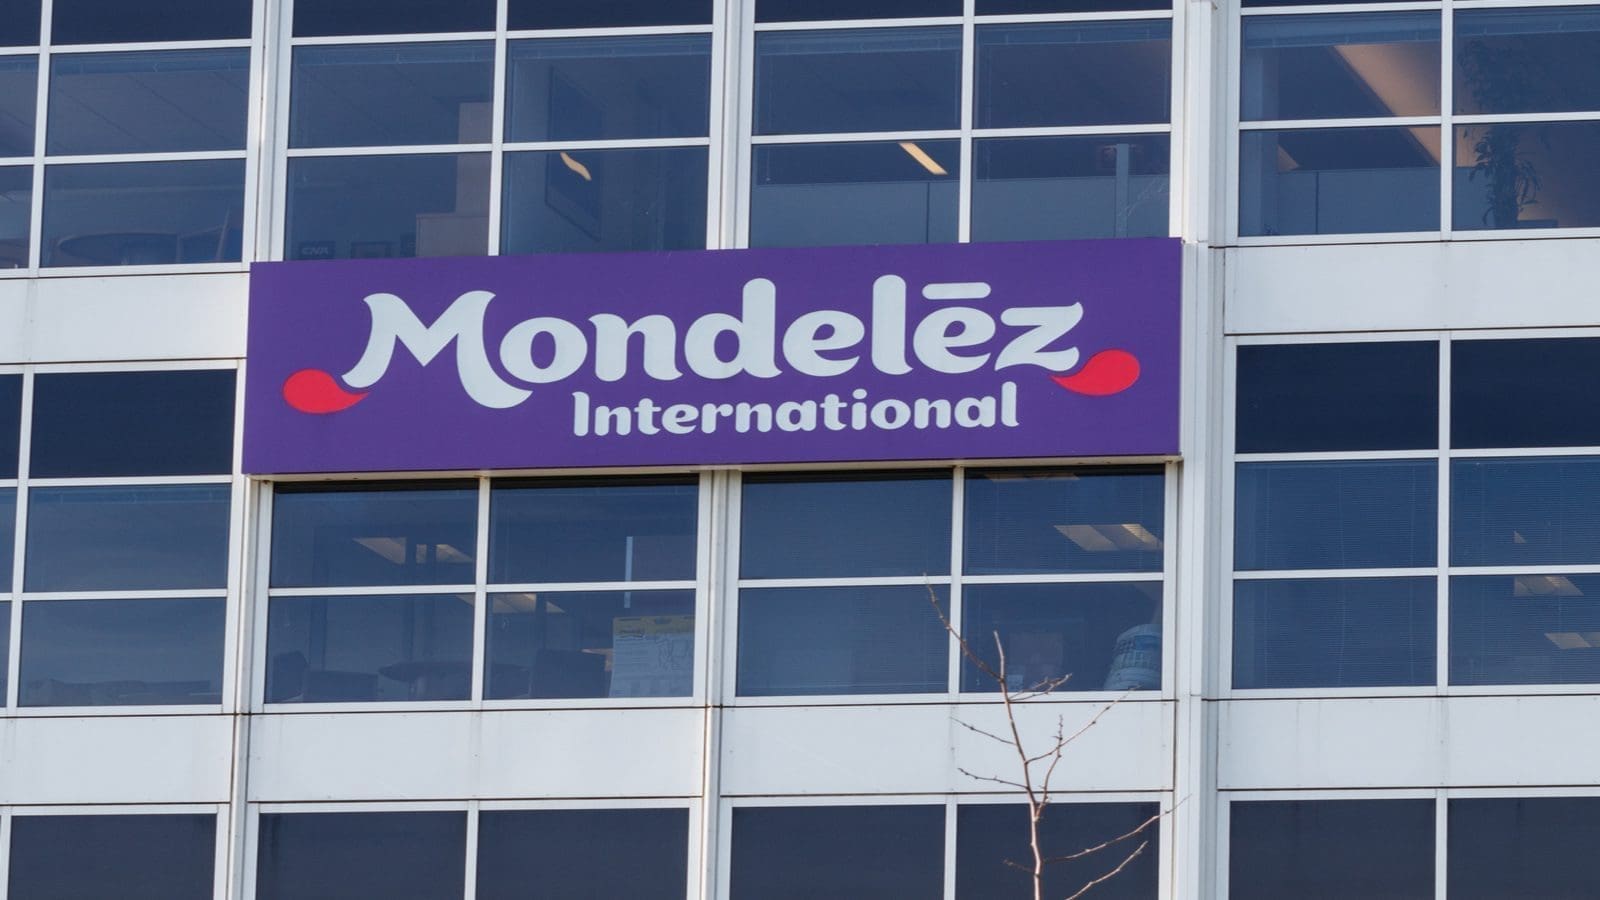 Mondelez triumphs labor actions, supply chain challenges to post 8% rise in 2021 net sales  